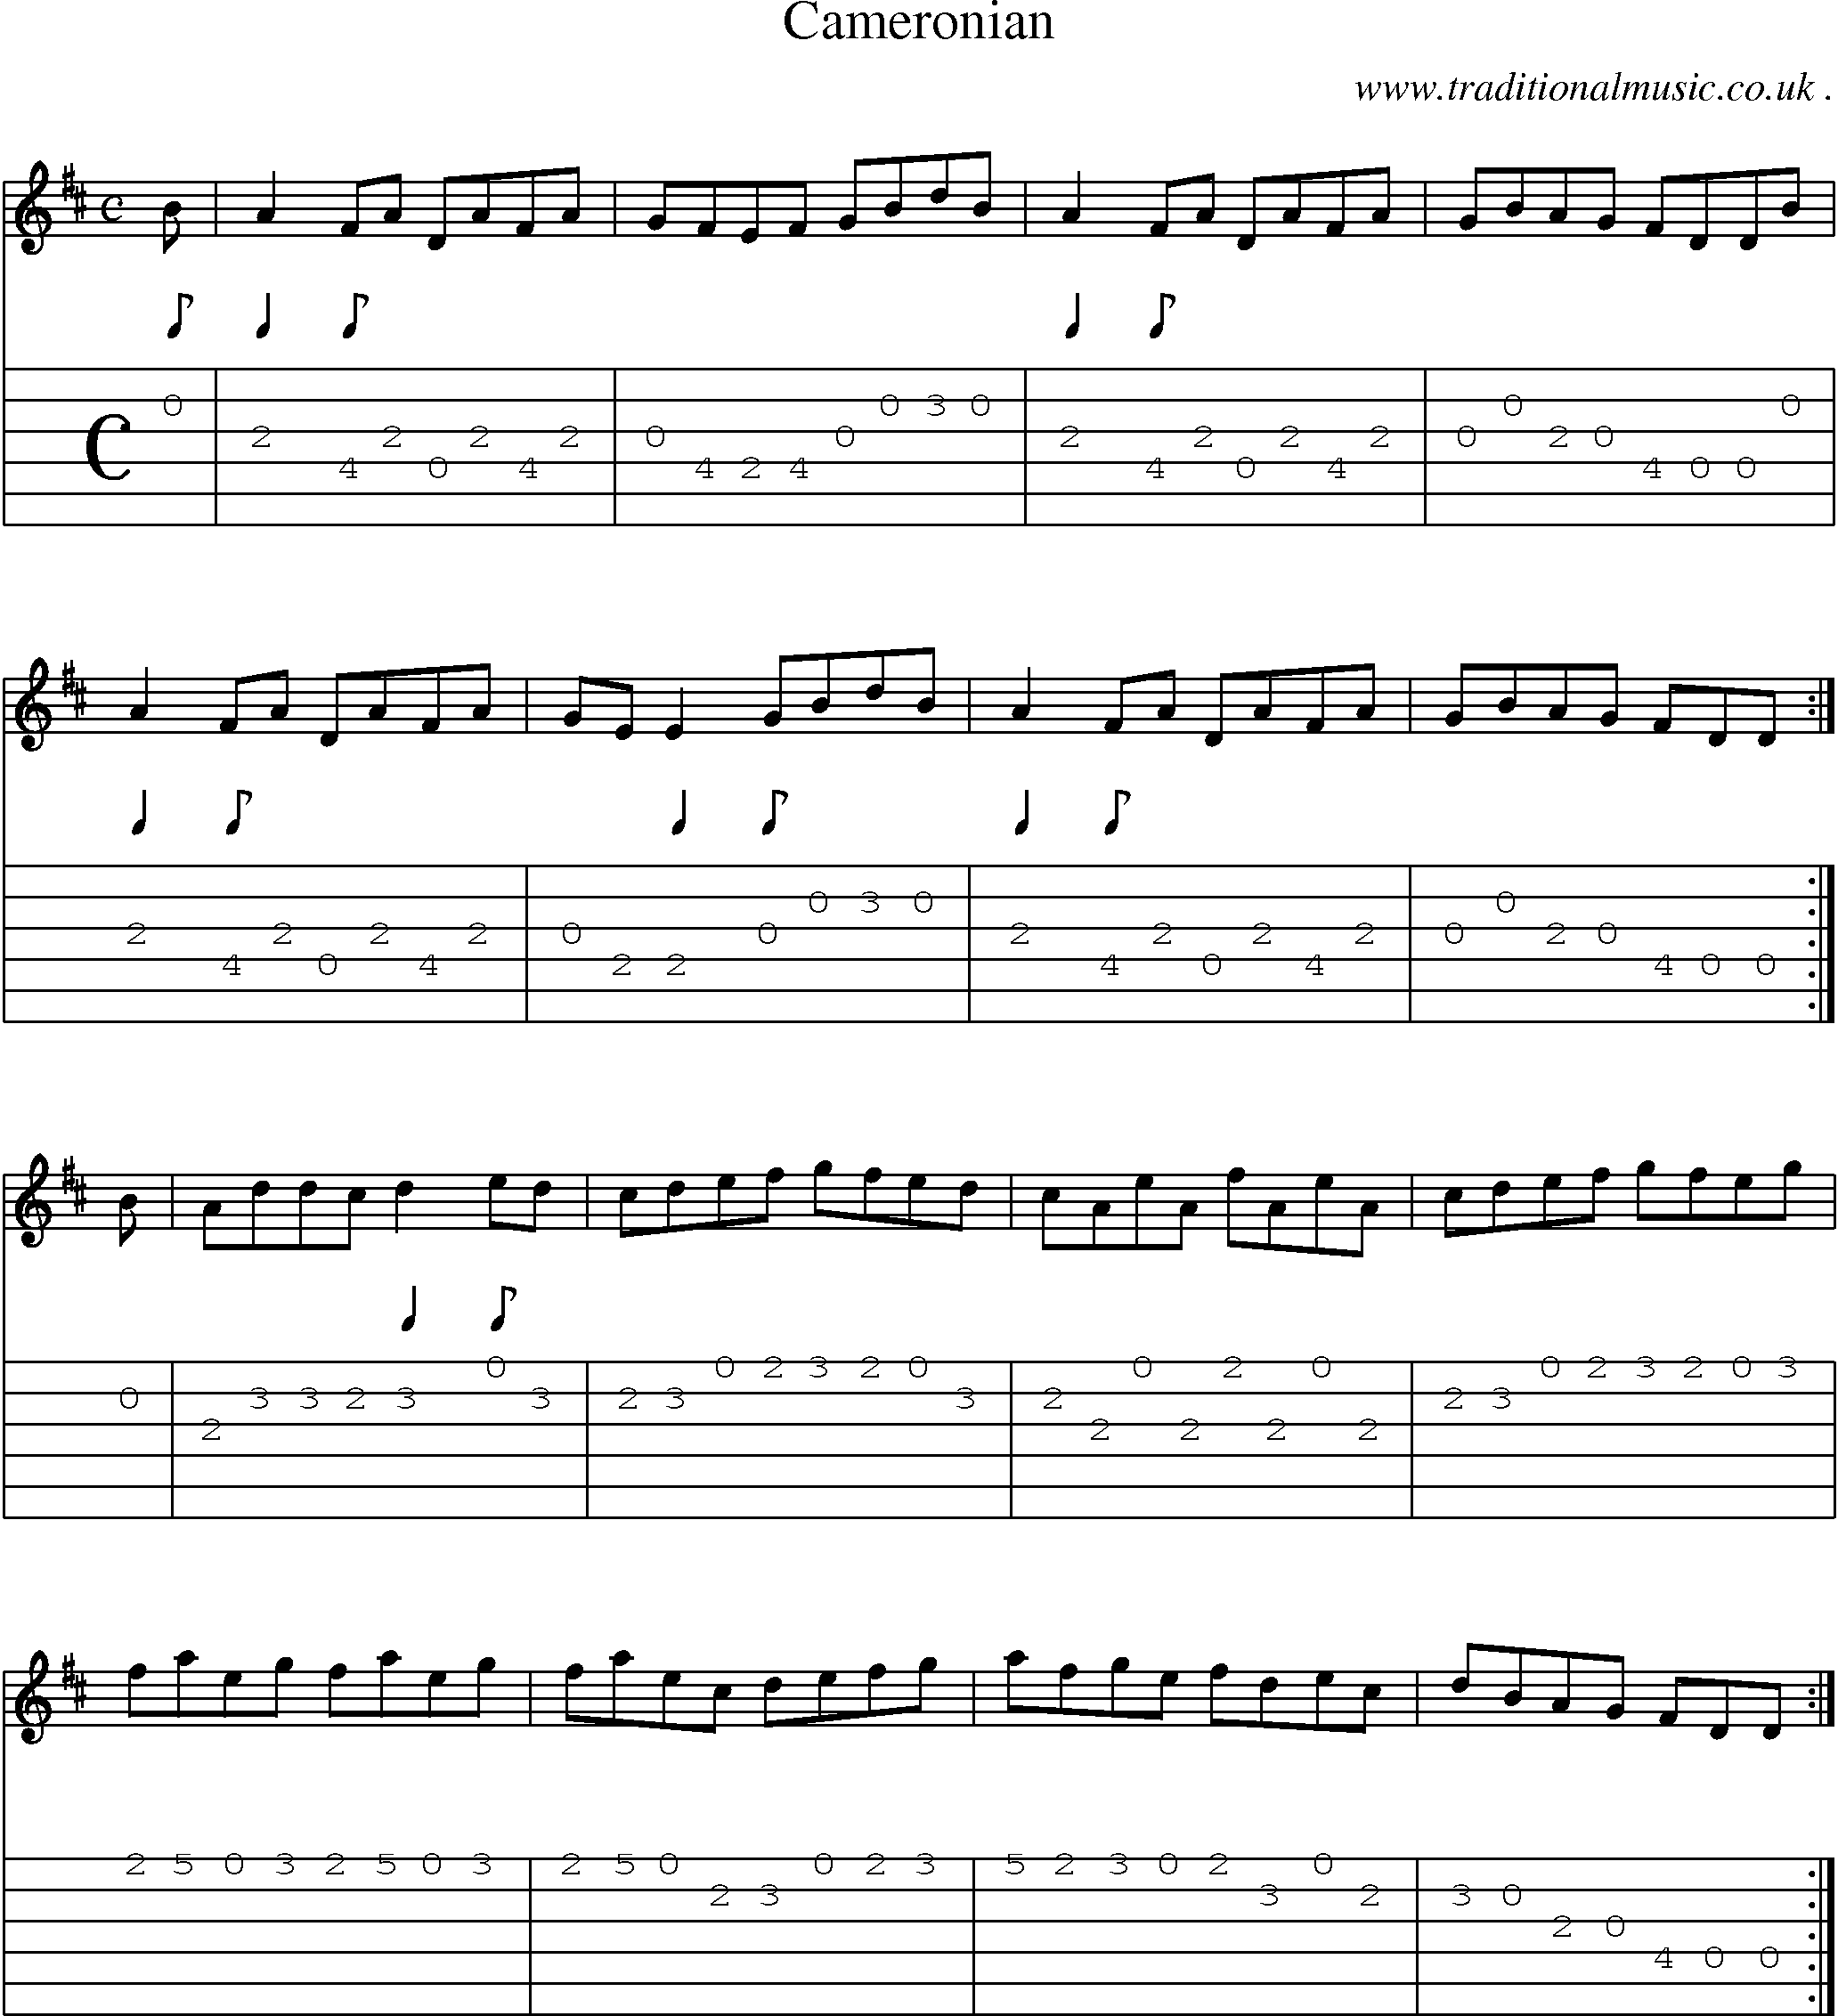 Sheet-Music and Guitar Tabs for Cameronian